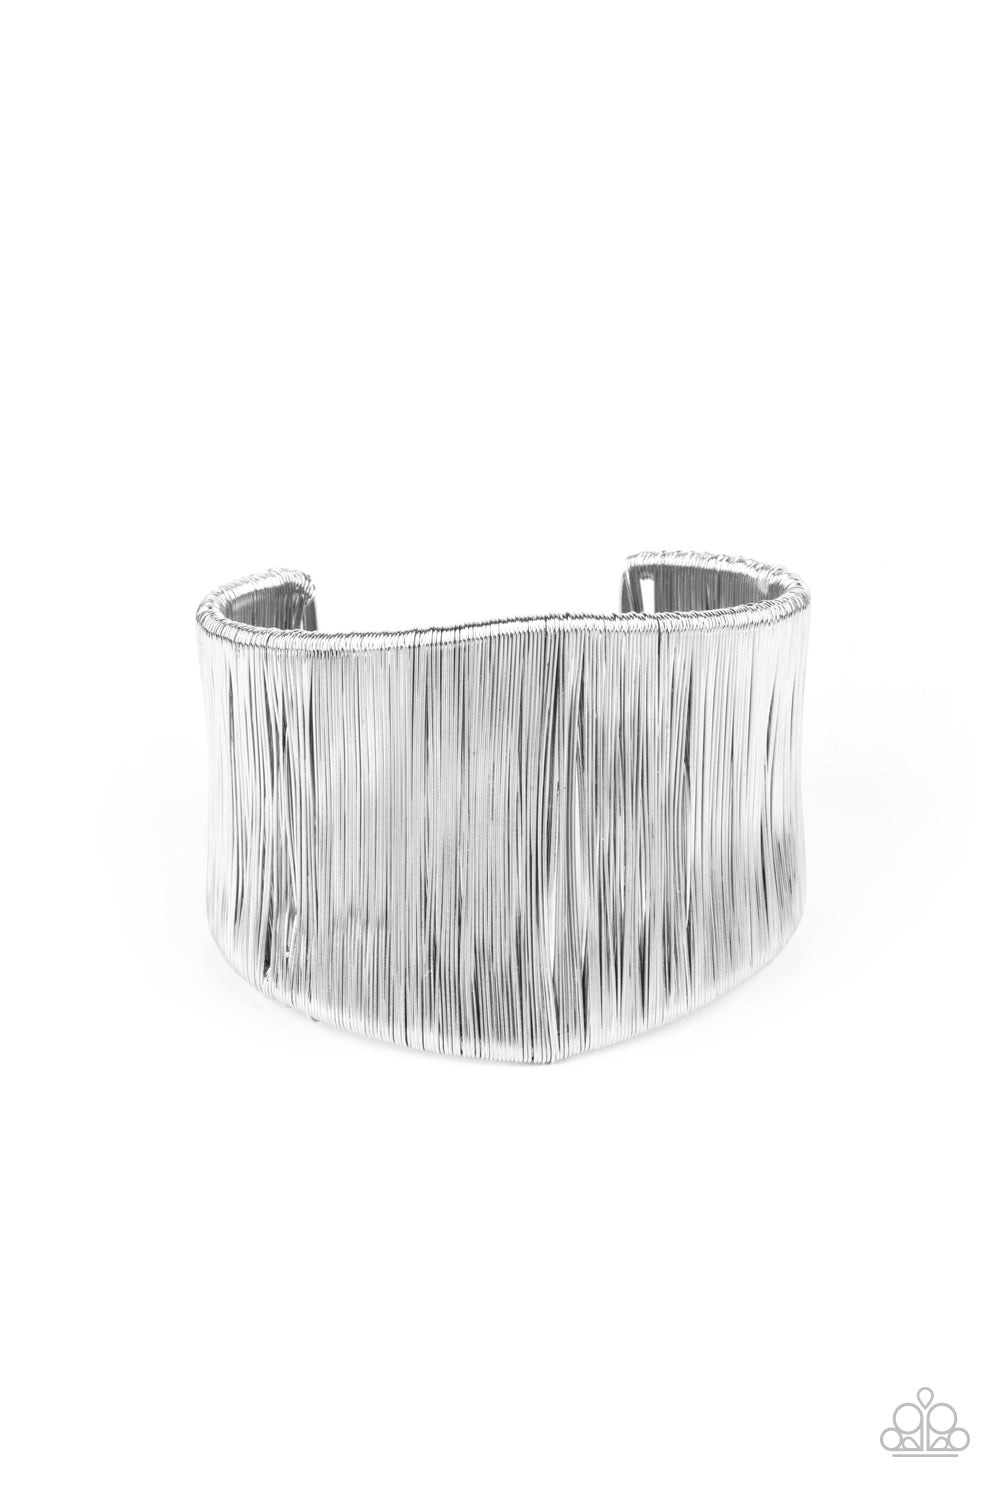 Hot Wired Wonder - Silver Bracelets a seemingly infinite collection of shimmery silver wire wraps around a substantial silver cuff, creating a bold industrial inspired centerpiece around the wrist.  Sold as one individual bracelet.